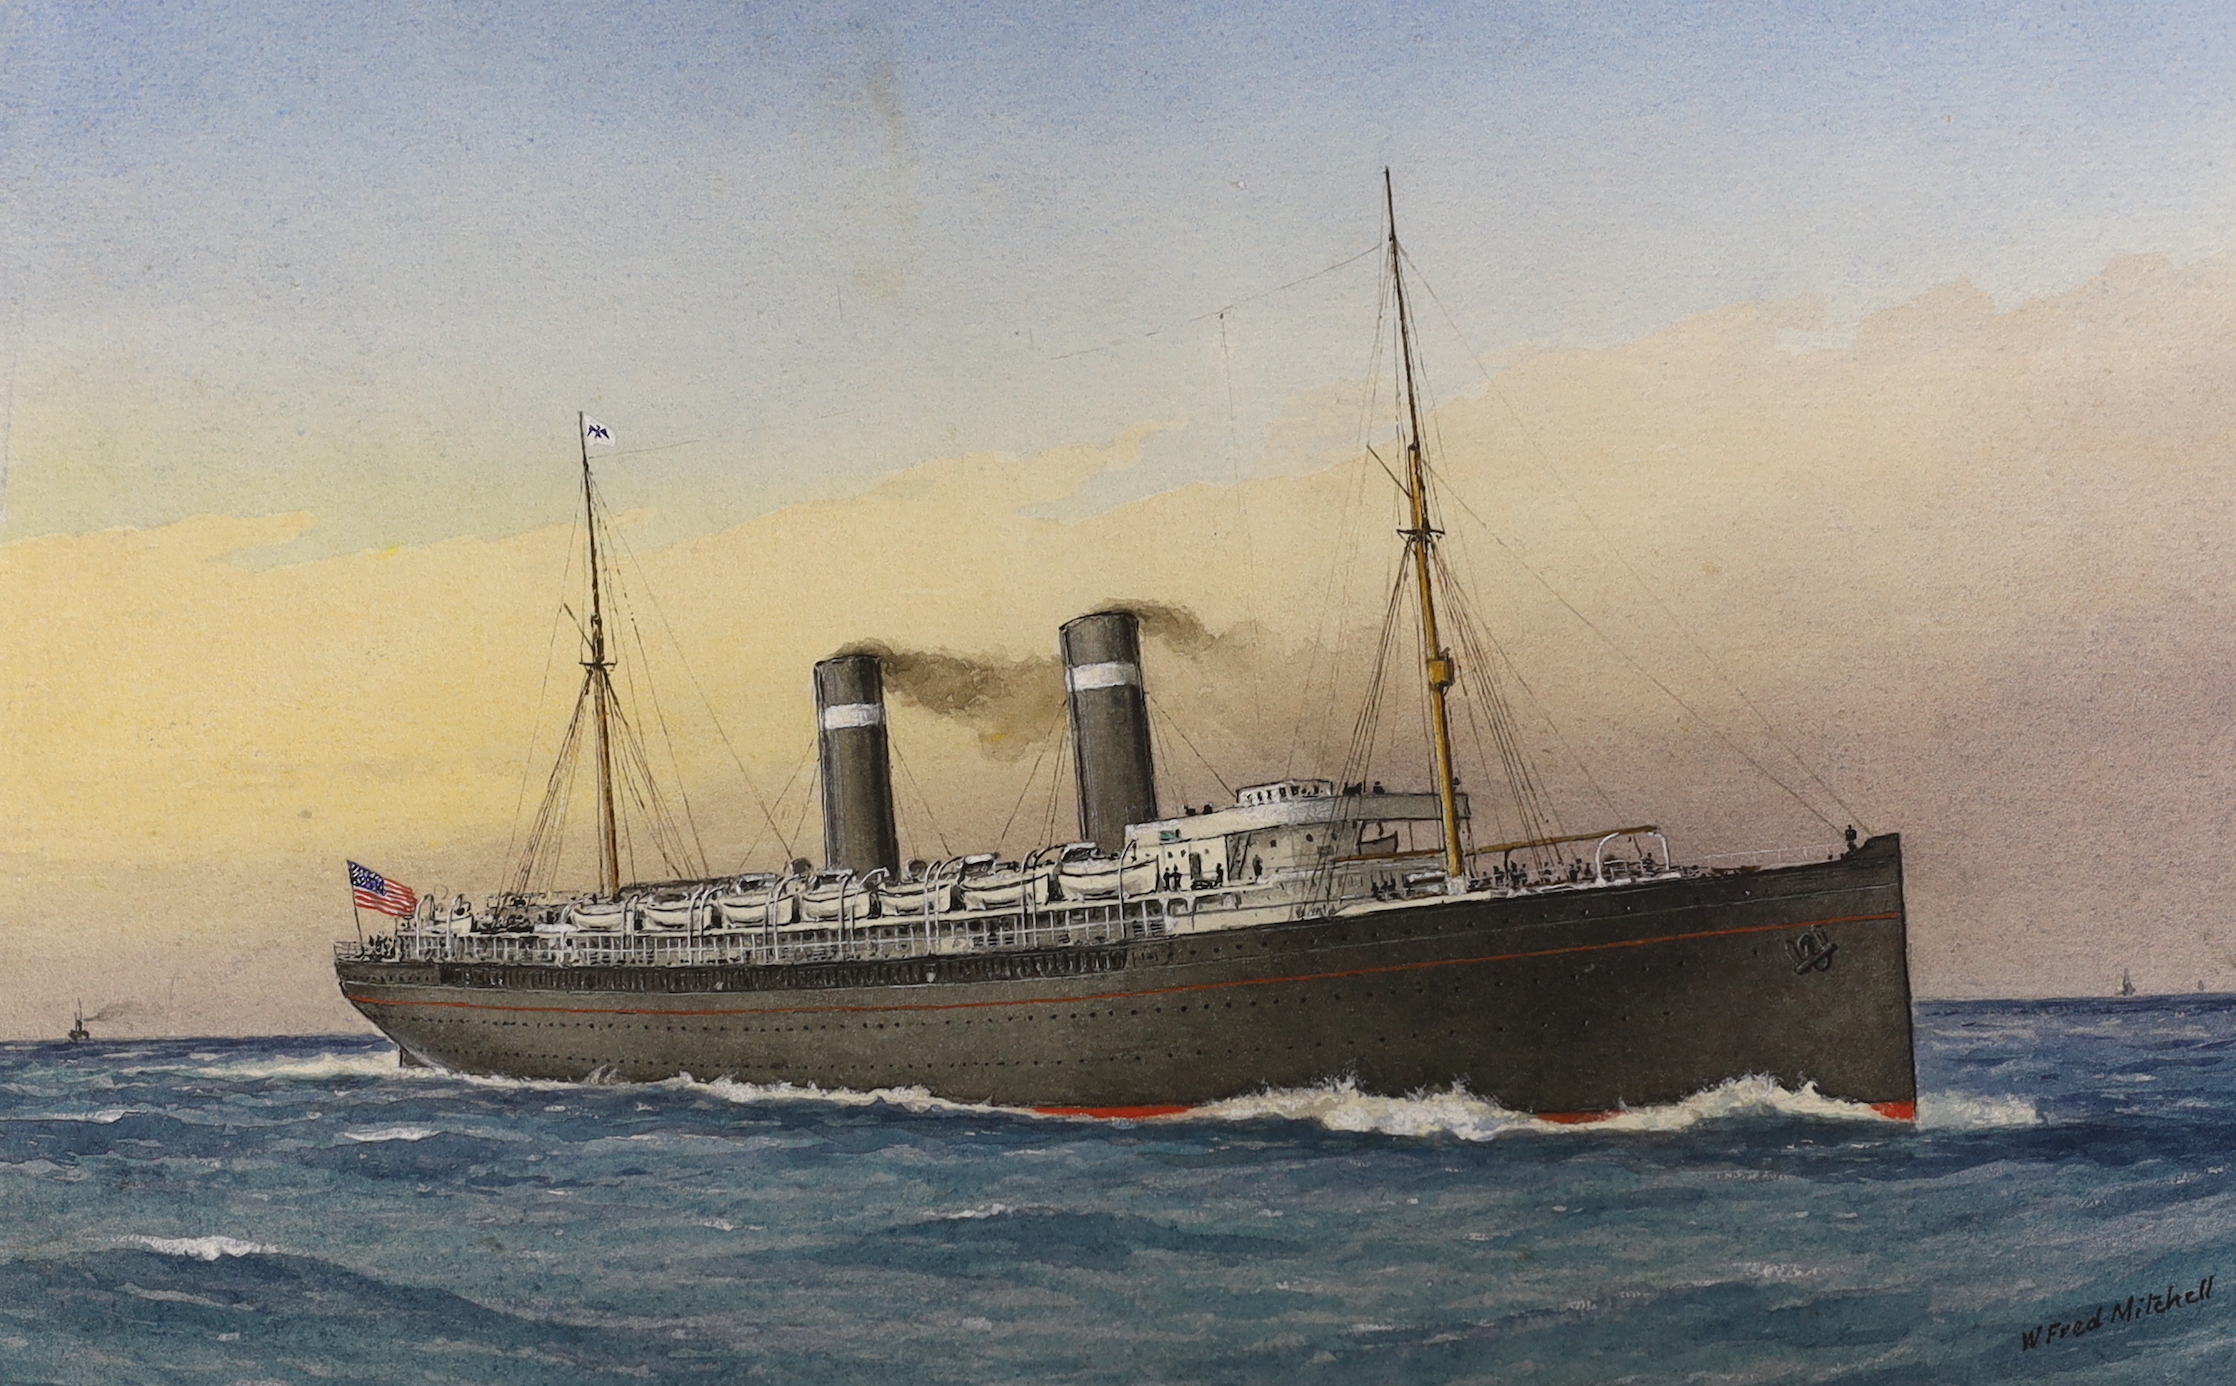 William Frederick Mitchell (1845-1914), set of four maritime watercolours, ‘Shamrock IV’, ‘Storstad’, ‘St Louis’ and ‘Empress of Ireland’, each signed, two dated 1914, 17 x 26cm, unframed